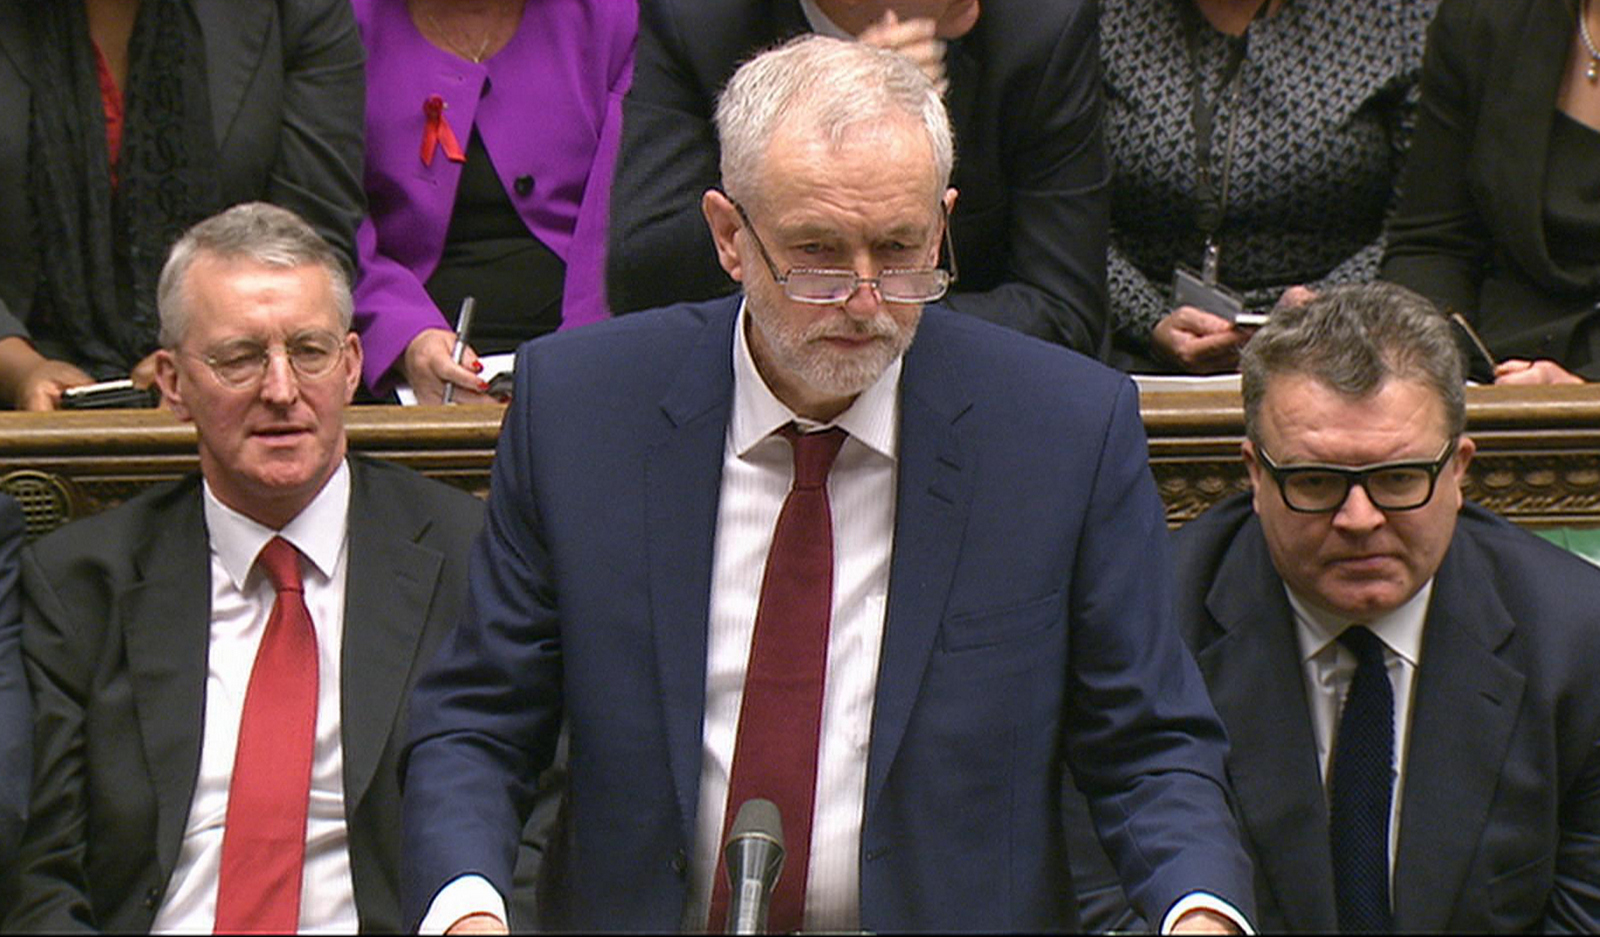 Opposition Labour Party leader, Jeremy Corbyn, centre, stands as he makes a speech to lawmakers inside the House of Commons in London, during a debate on launching airstrikes against ISIS extremists inside Syria, Wednesday, Dec. 2, 2015. Shadow Foreign Secretary Hilary Ben sitting left, and Labour Party Deputy leader Tom Watson, right. The parliamentary vote is expected Wednesday evening. (Parliamentary Recording Unit via AP Video) 